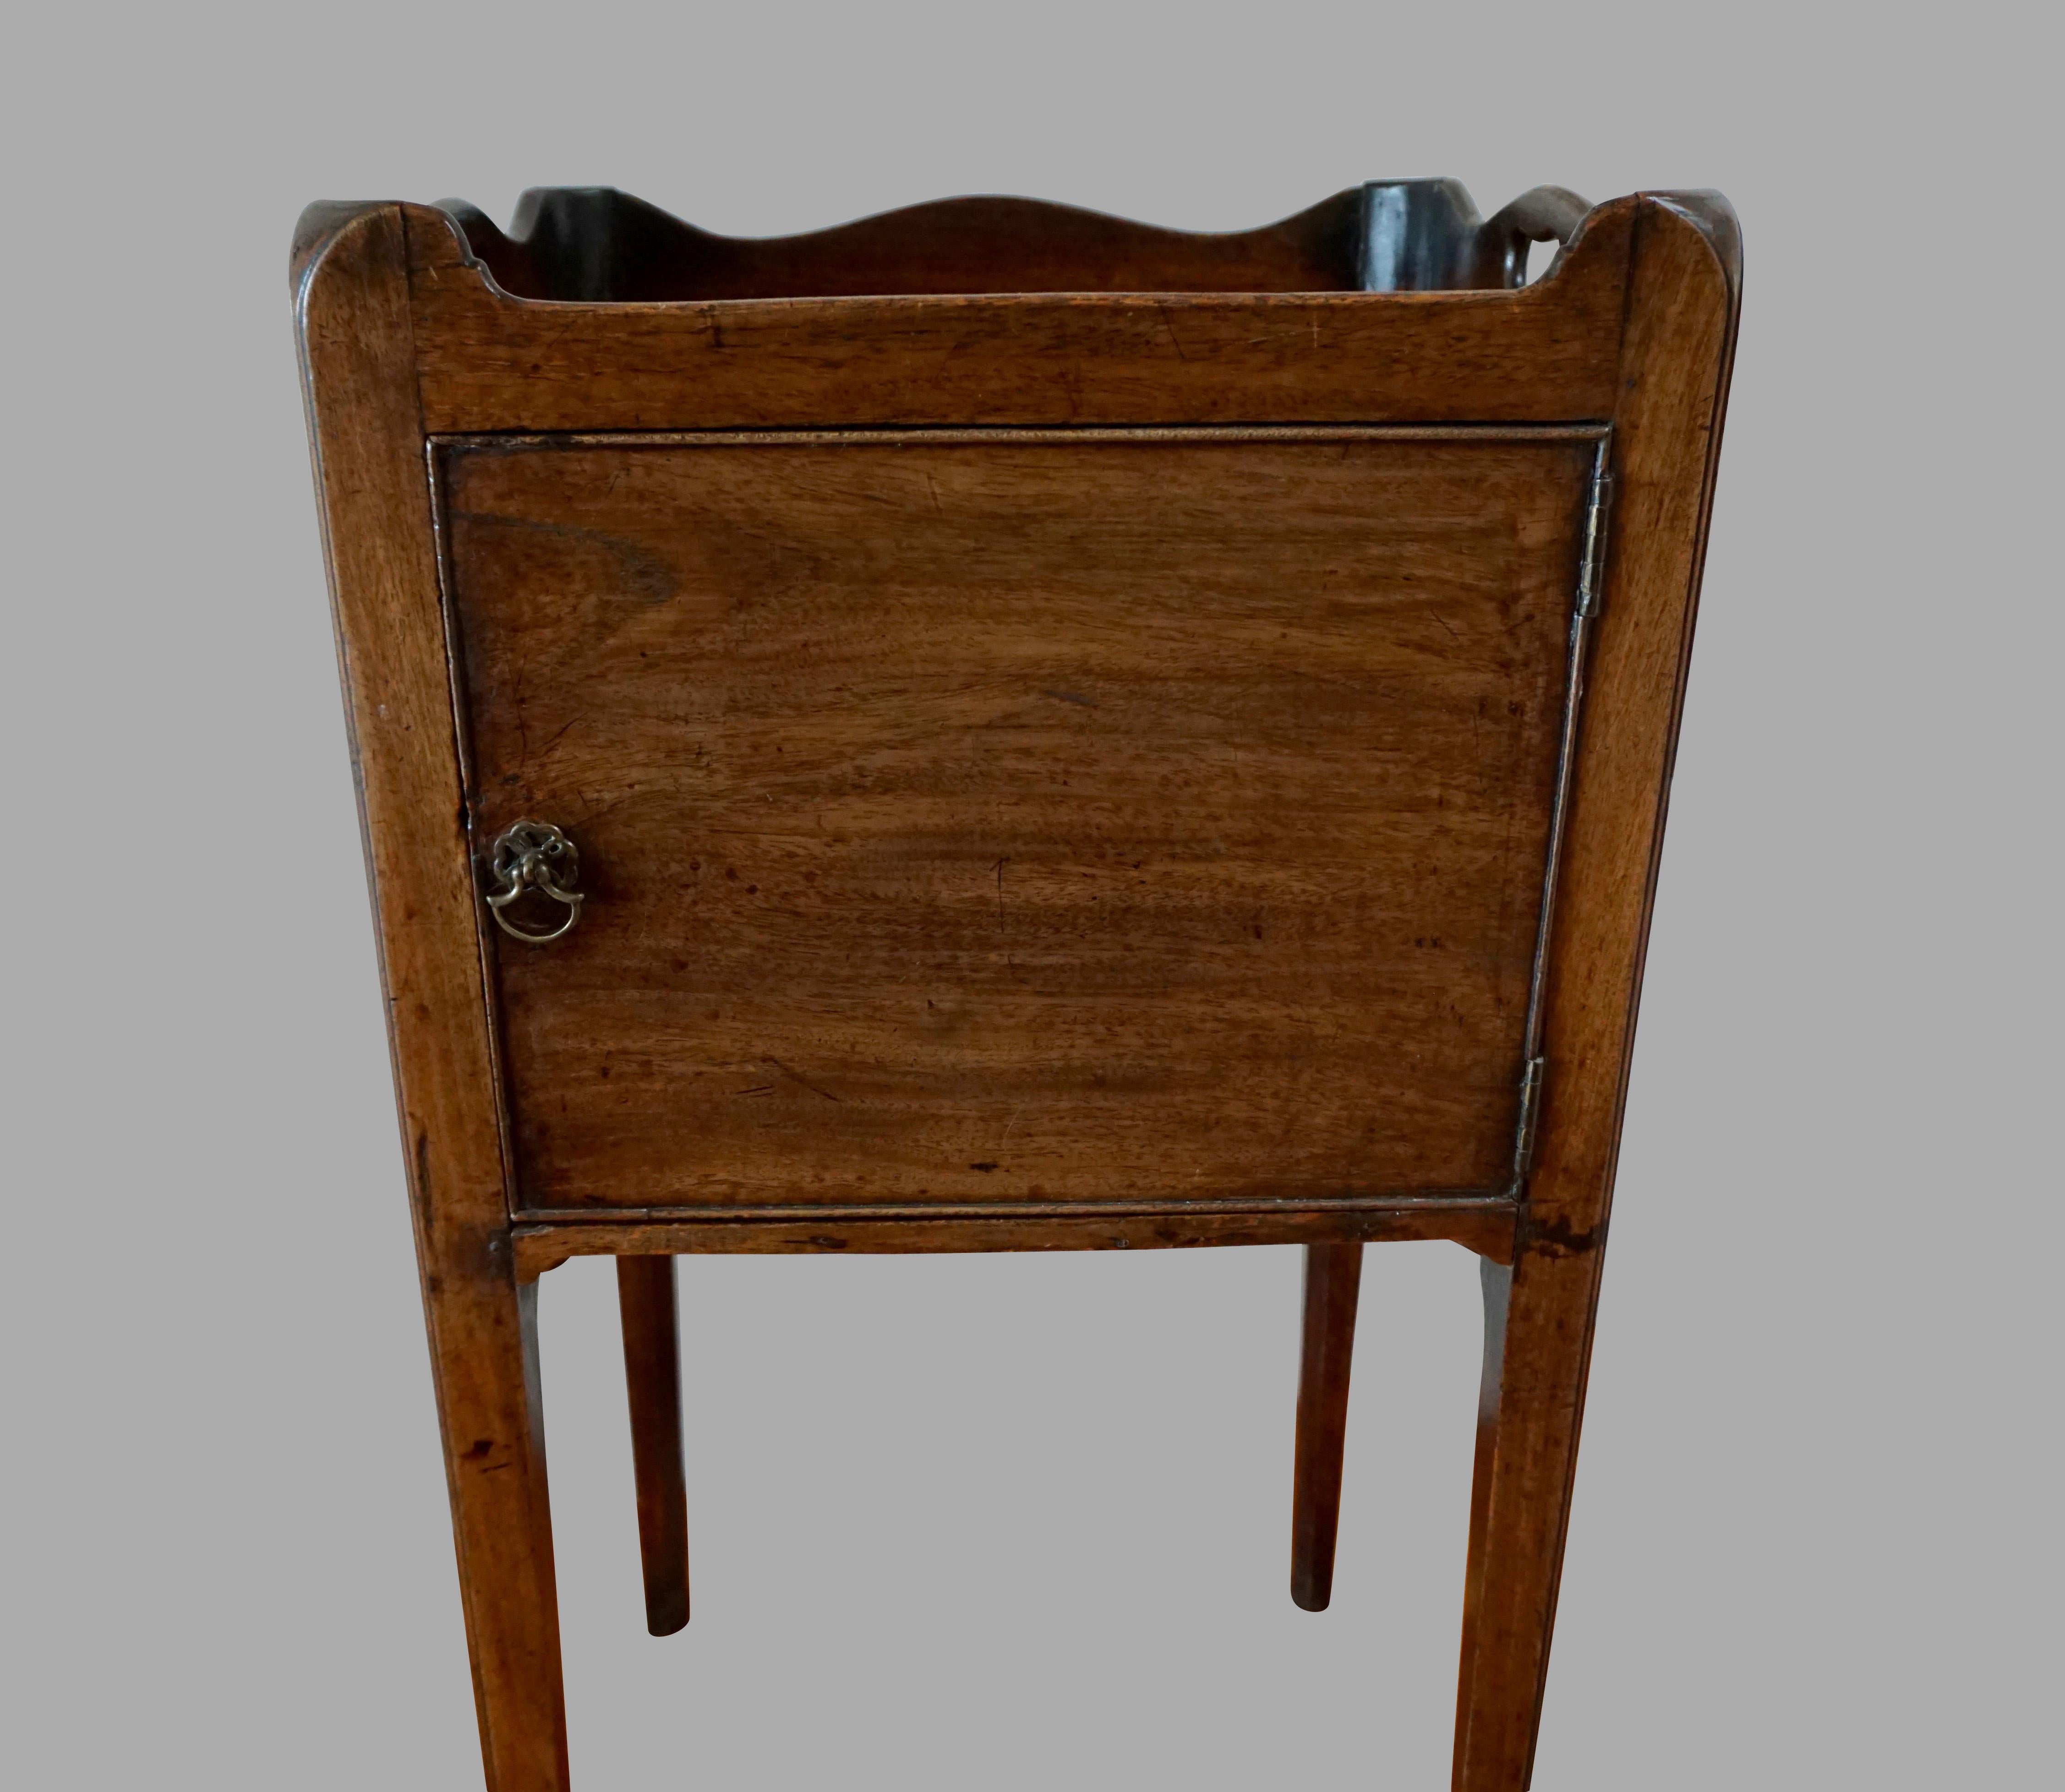 An English George III period mahogany bedside commode, the shaped gallery top with cutout handles above a cupboard door, supported on square tapered legs. Provenance: H.W. Keil Ltd. Tudor House, Broadway, Worcestershire U.K. Purchased 1985. Circa